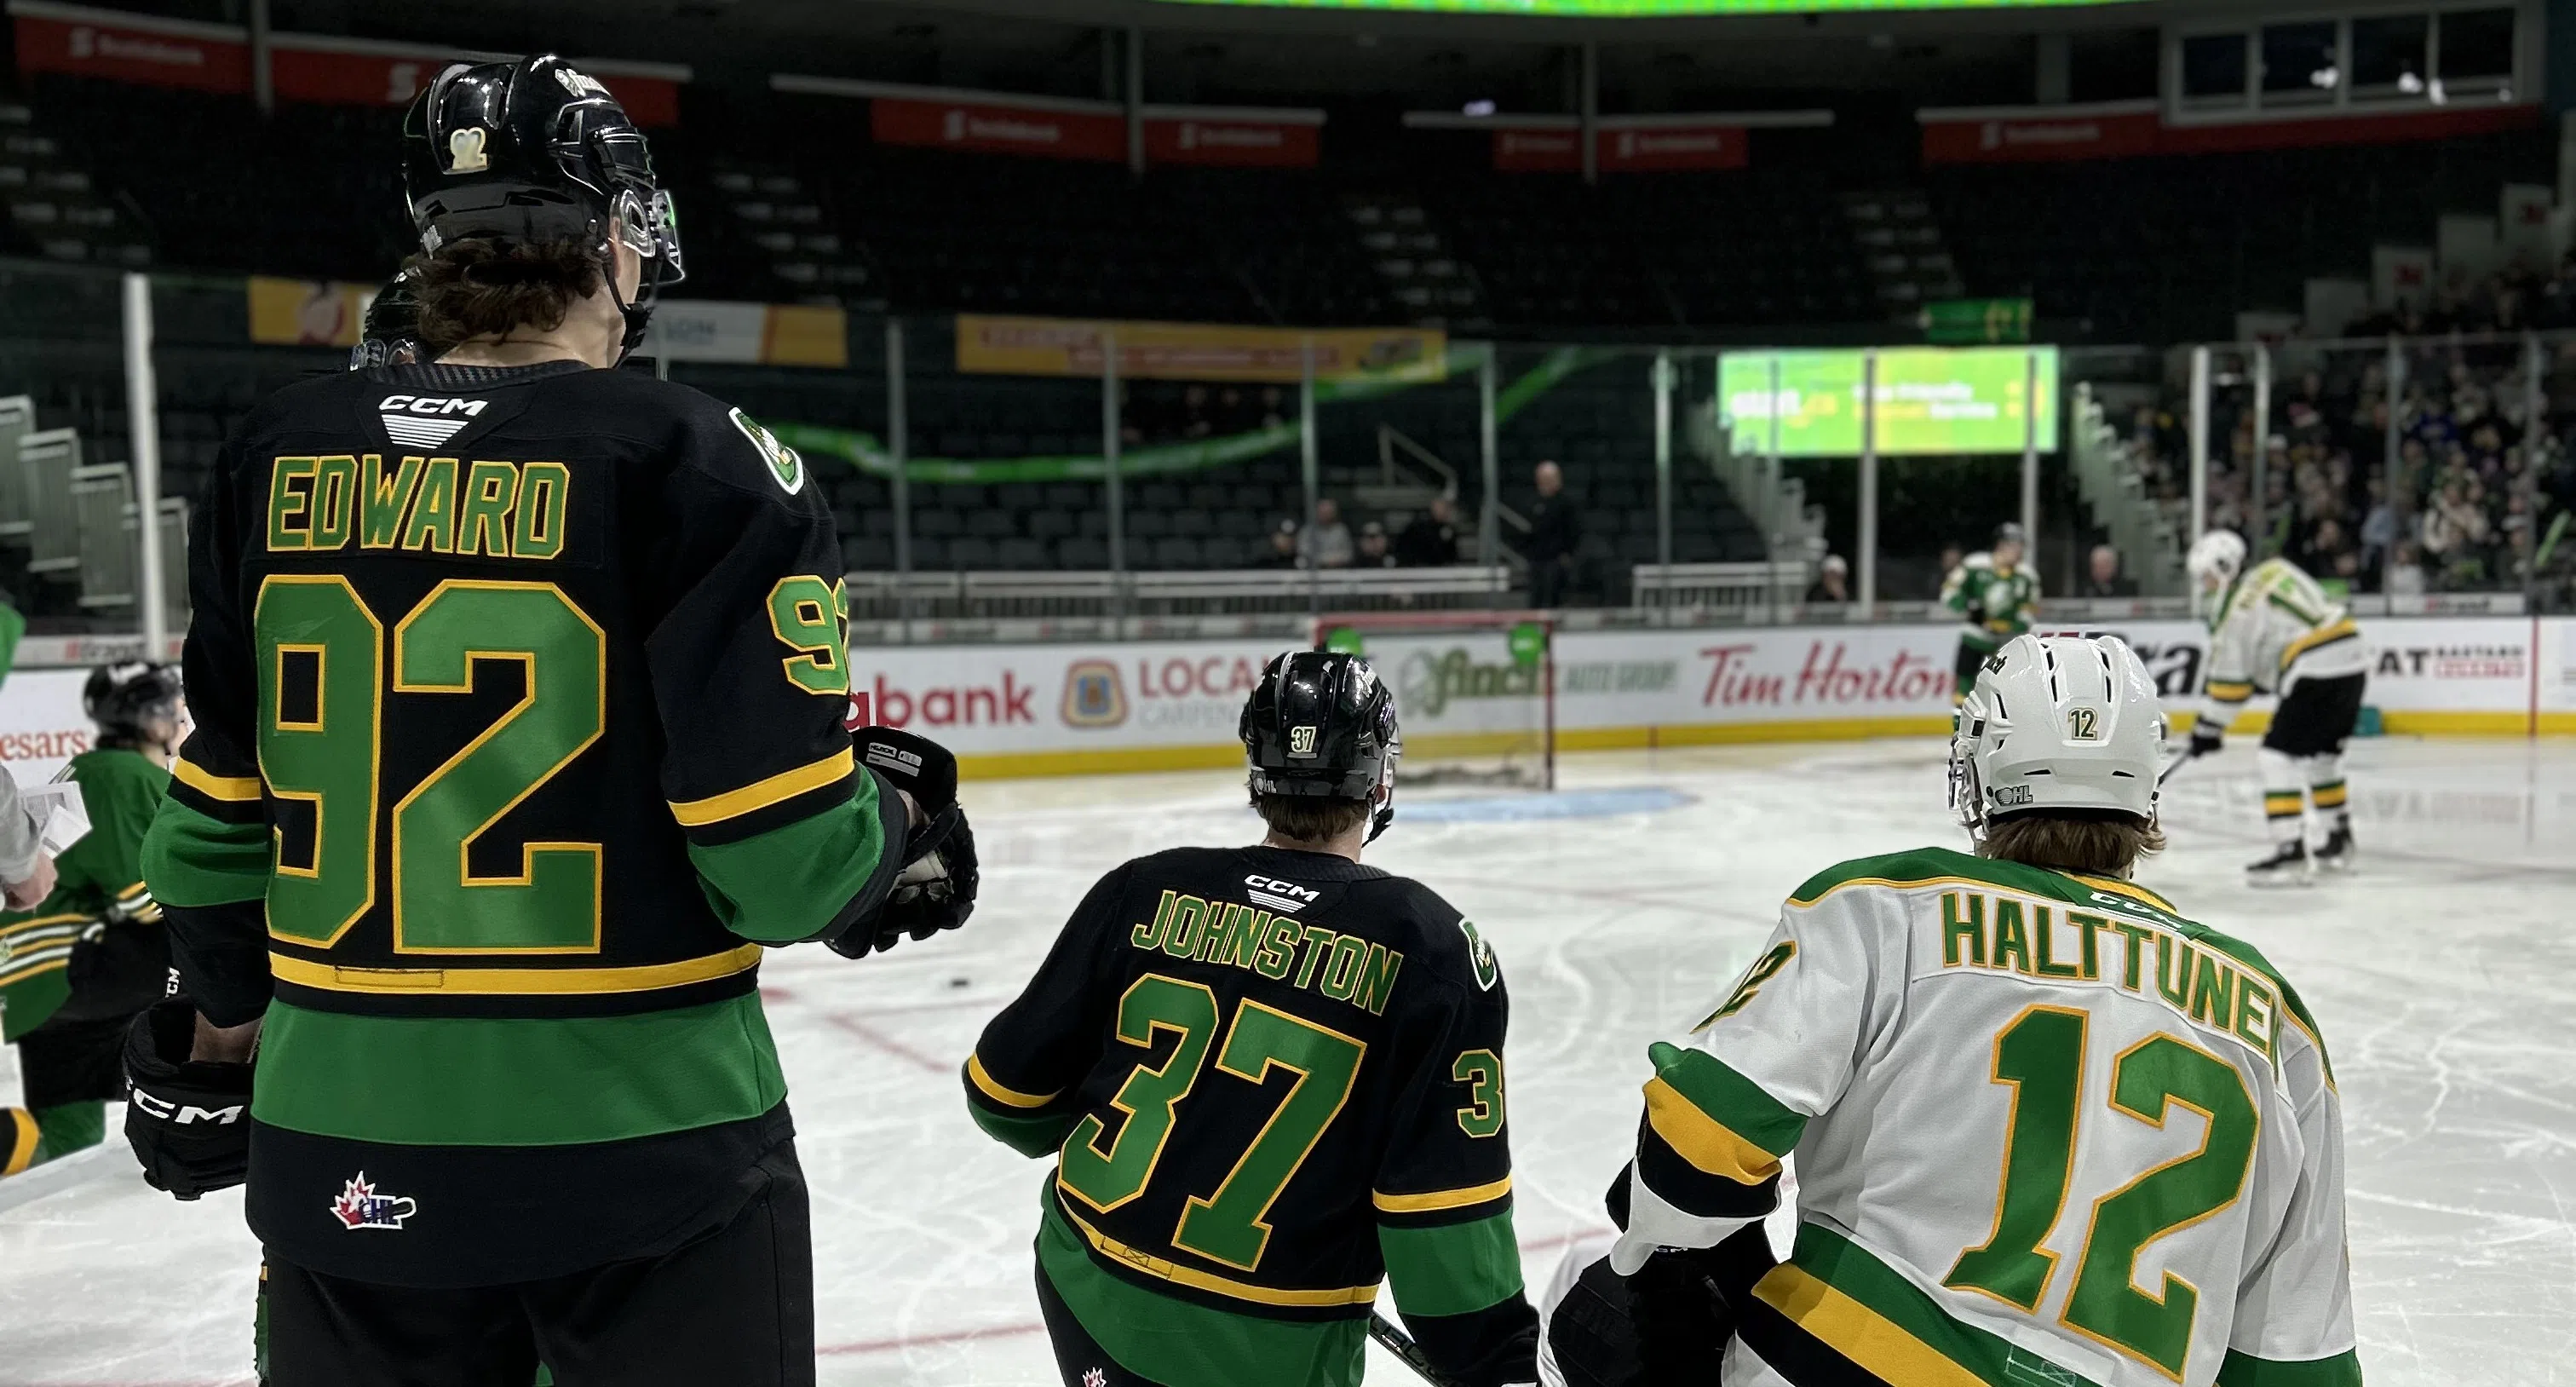 Social media for the London Knights